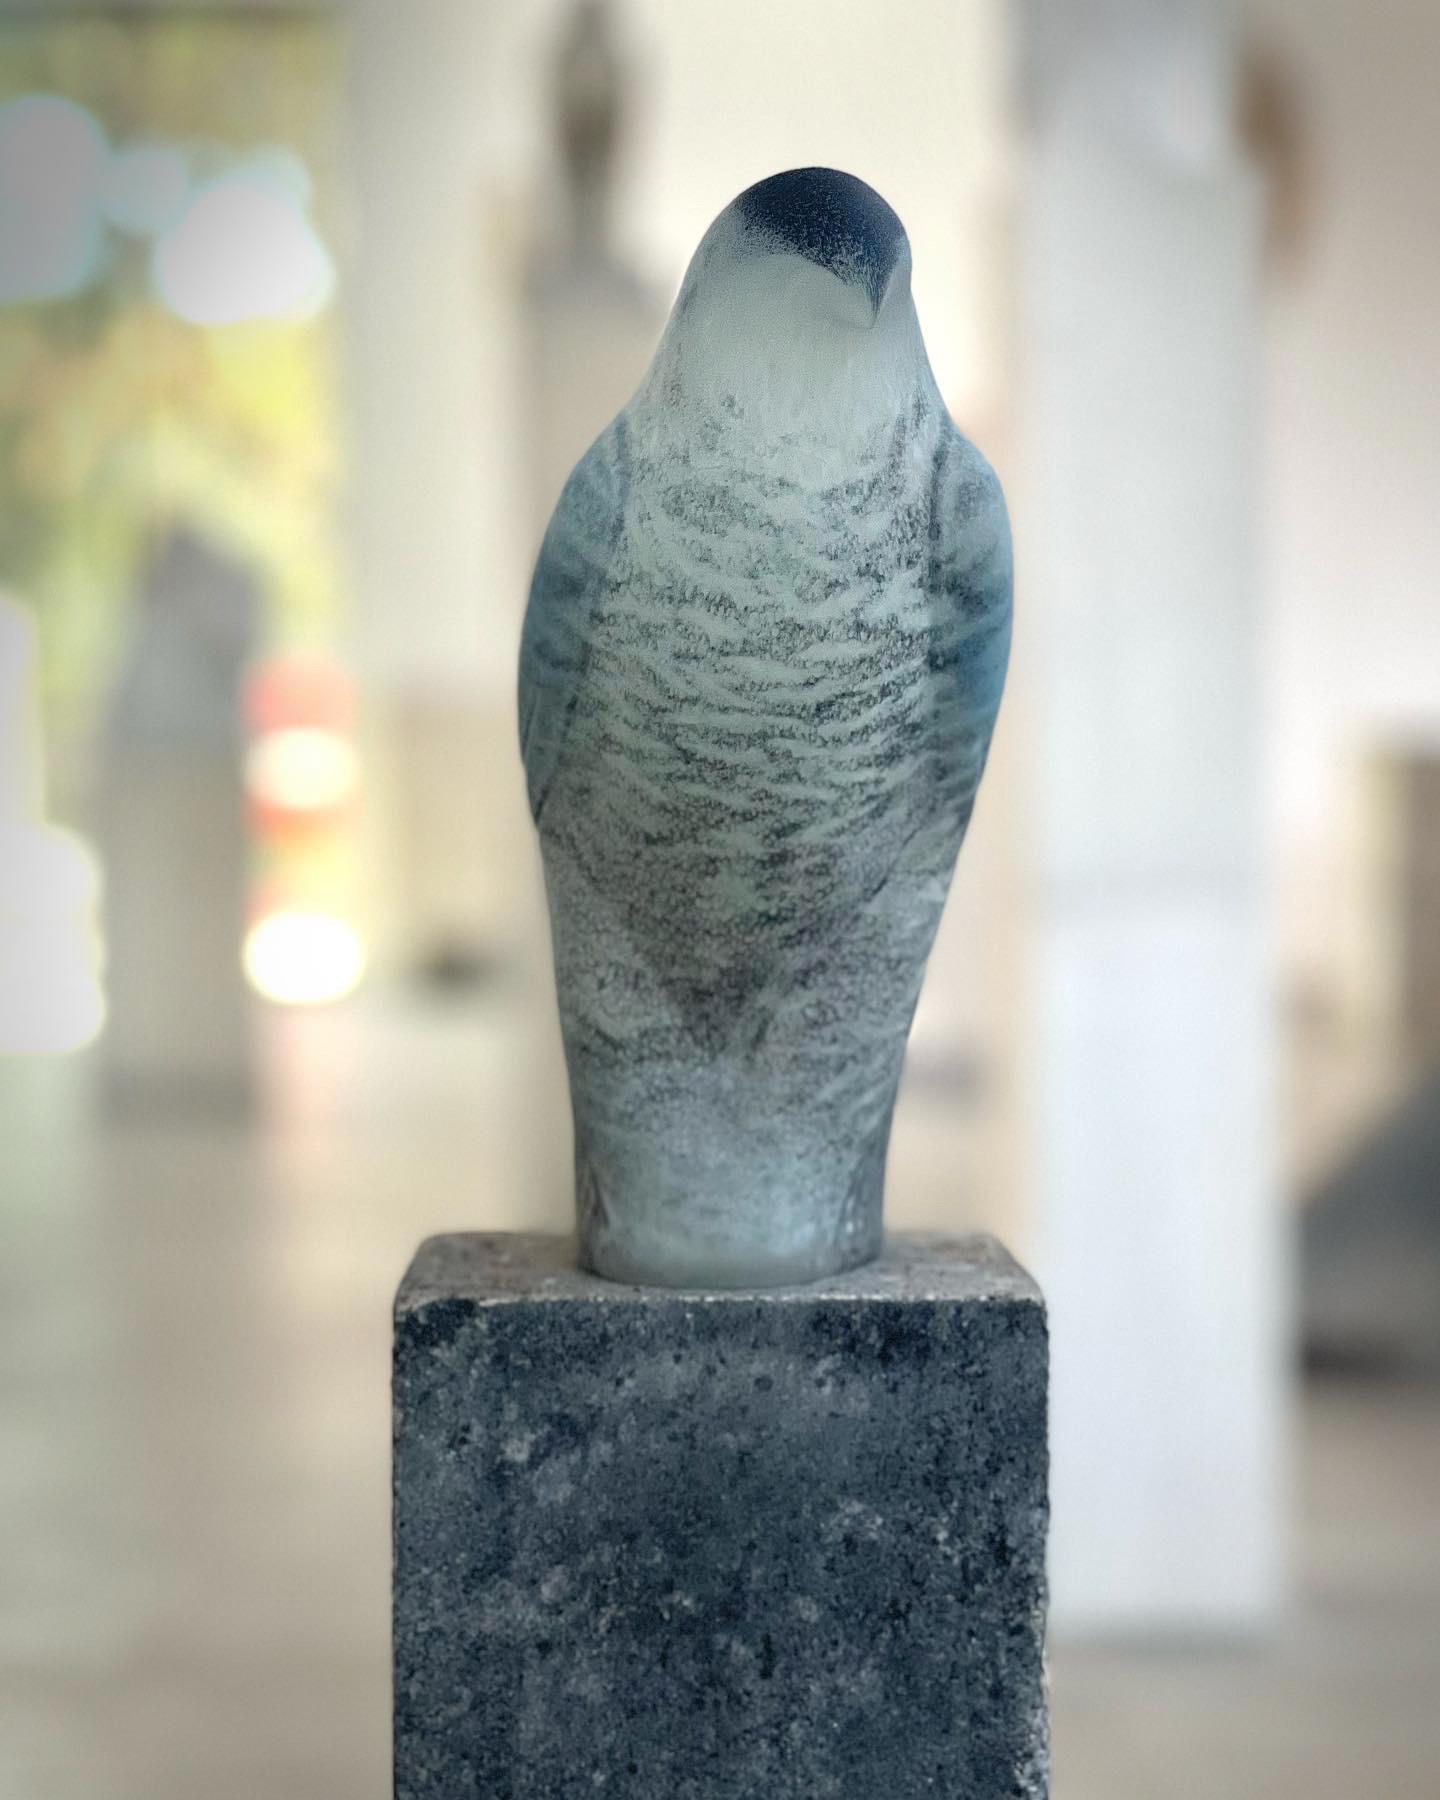 Hand blown pigmented glass and hand carved limestone from the renowned studio of Jane Rosen. 

Bird:  10" x 6" x 5"
Grey Limestone Base: 8" x 6" x 6"
Green Glass Base:  1" x 10" x 10"    
Total Dimension:  19" x 10" x 10"

**Additional Tall, Light